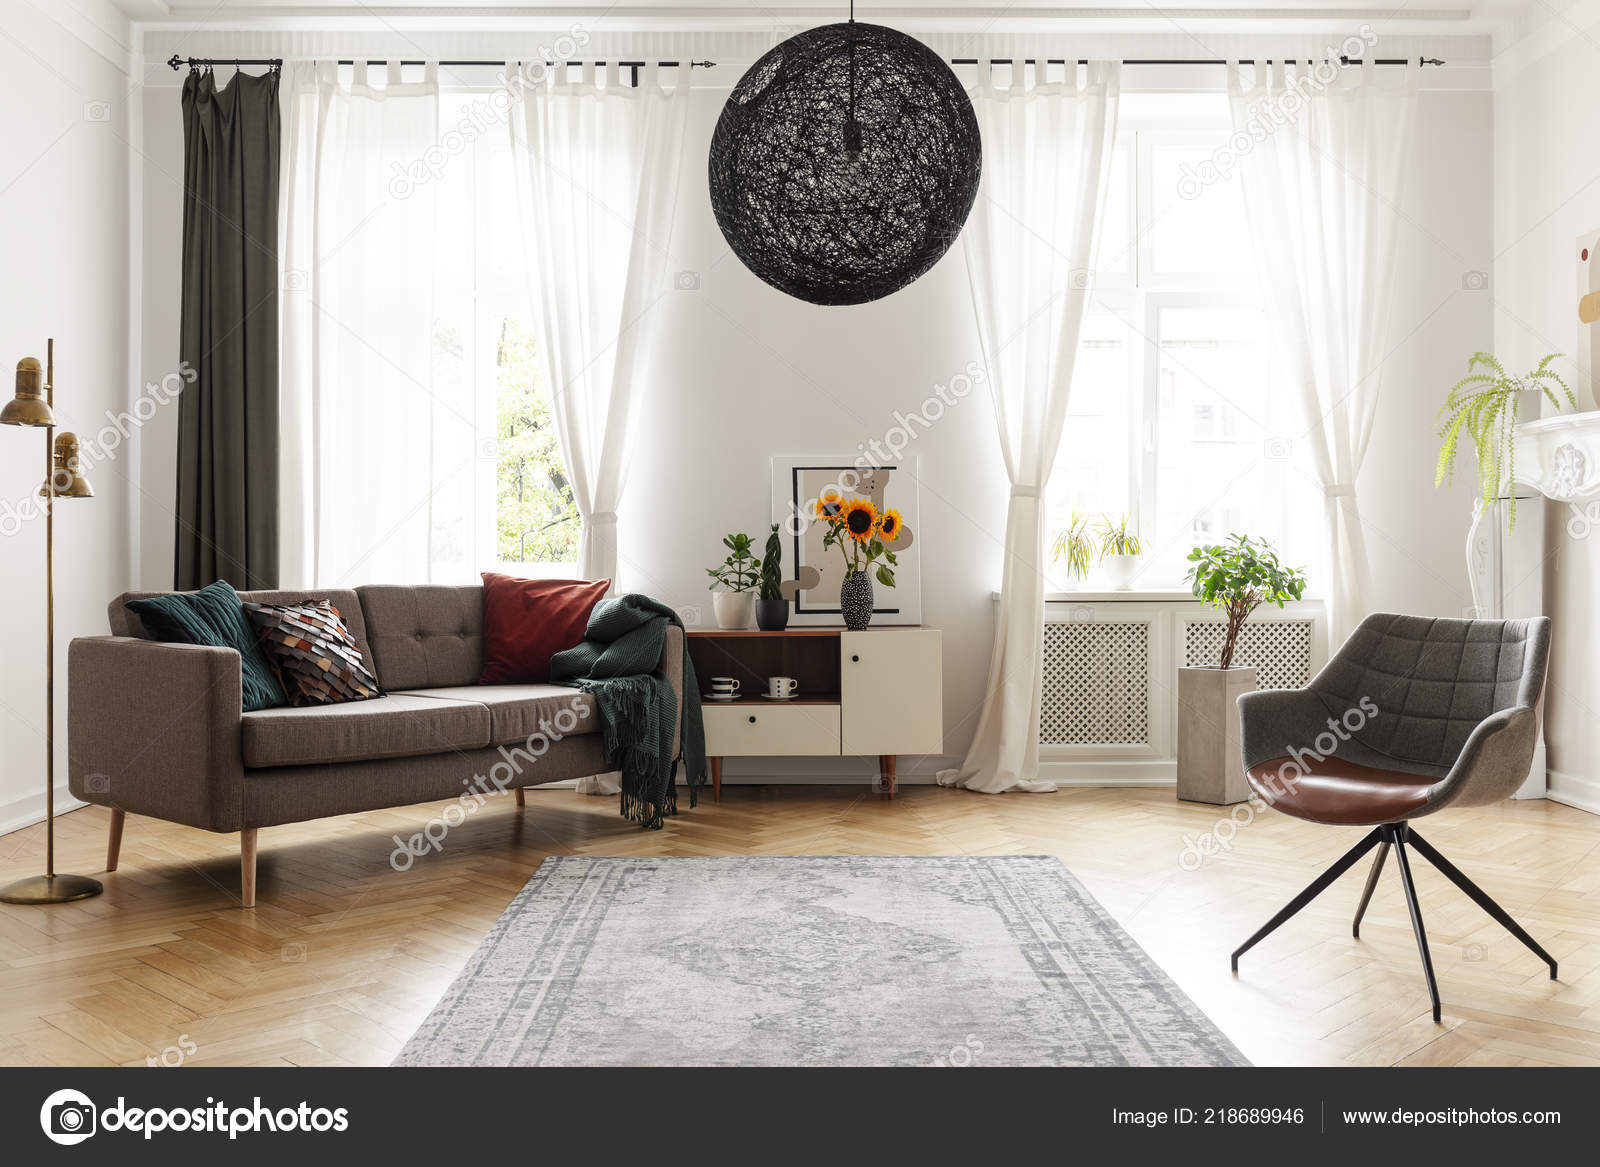 Rug Armchair Couch Living Room Interior Windows Sunflowers